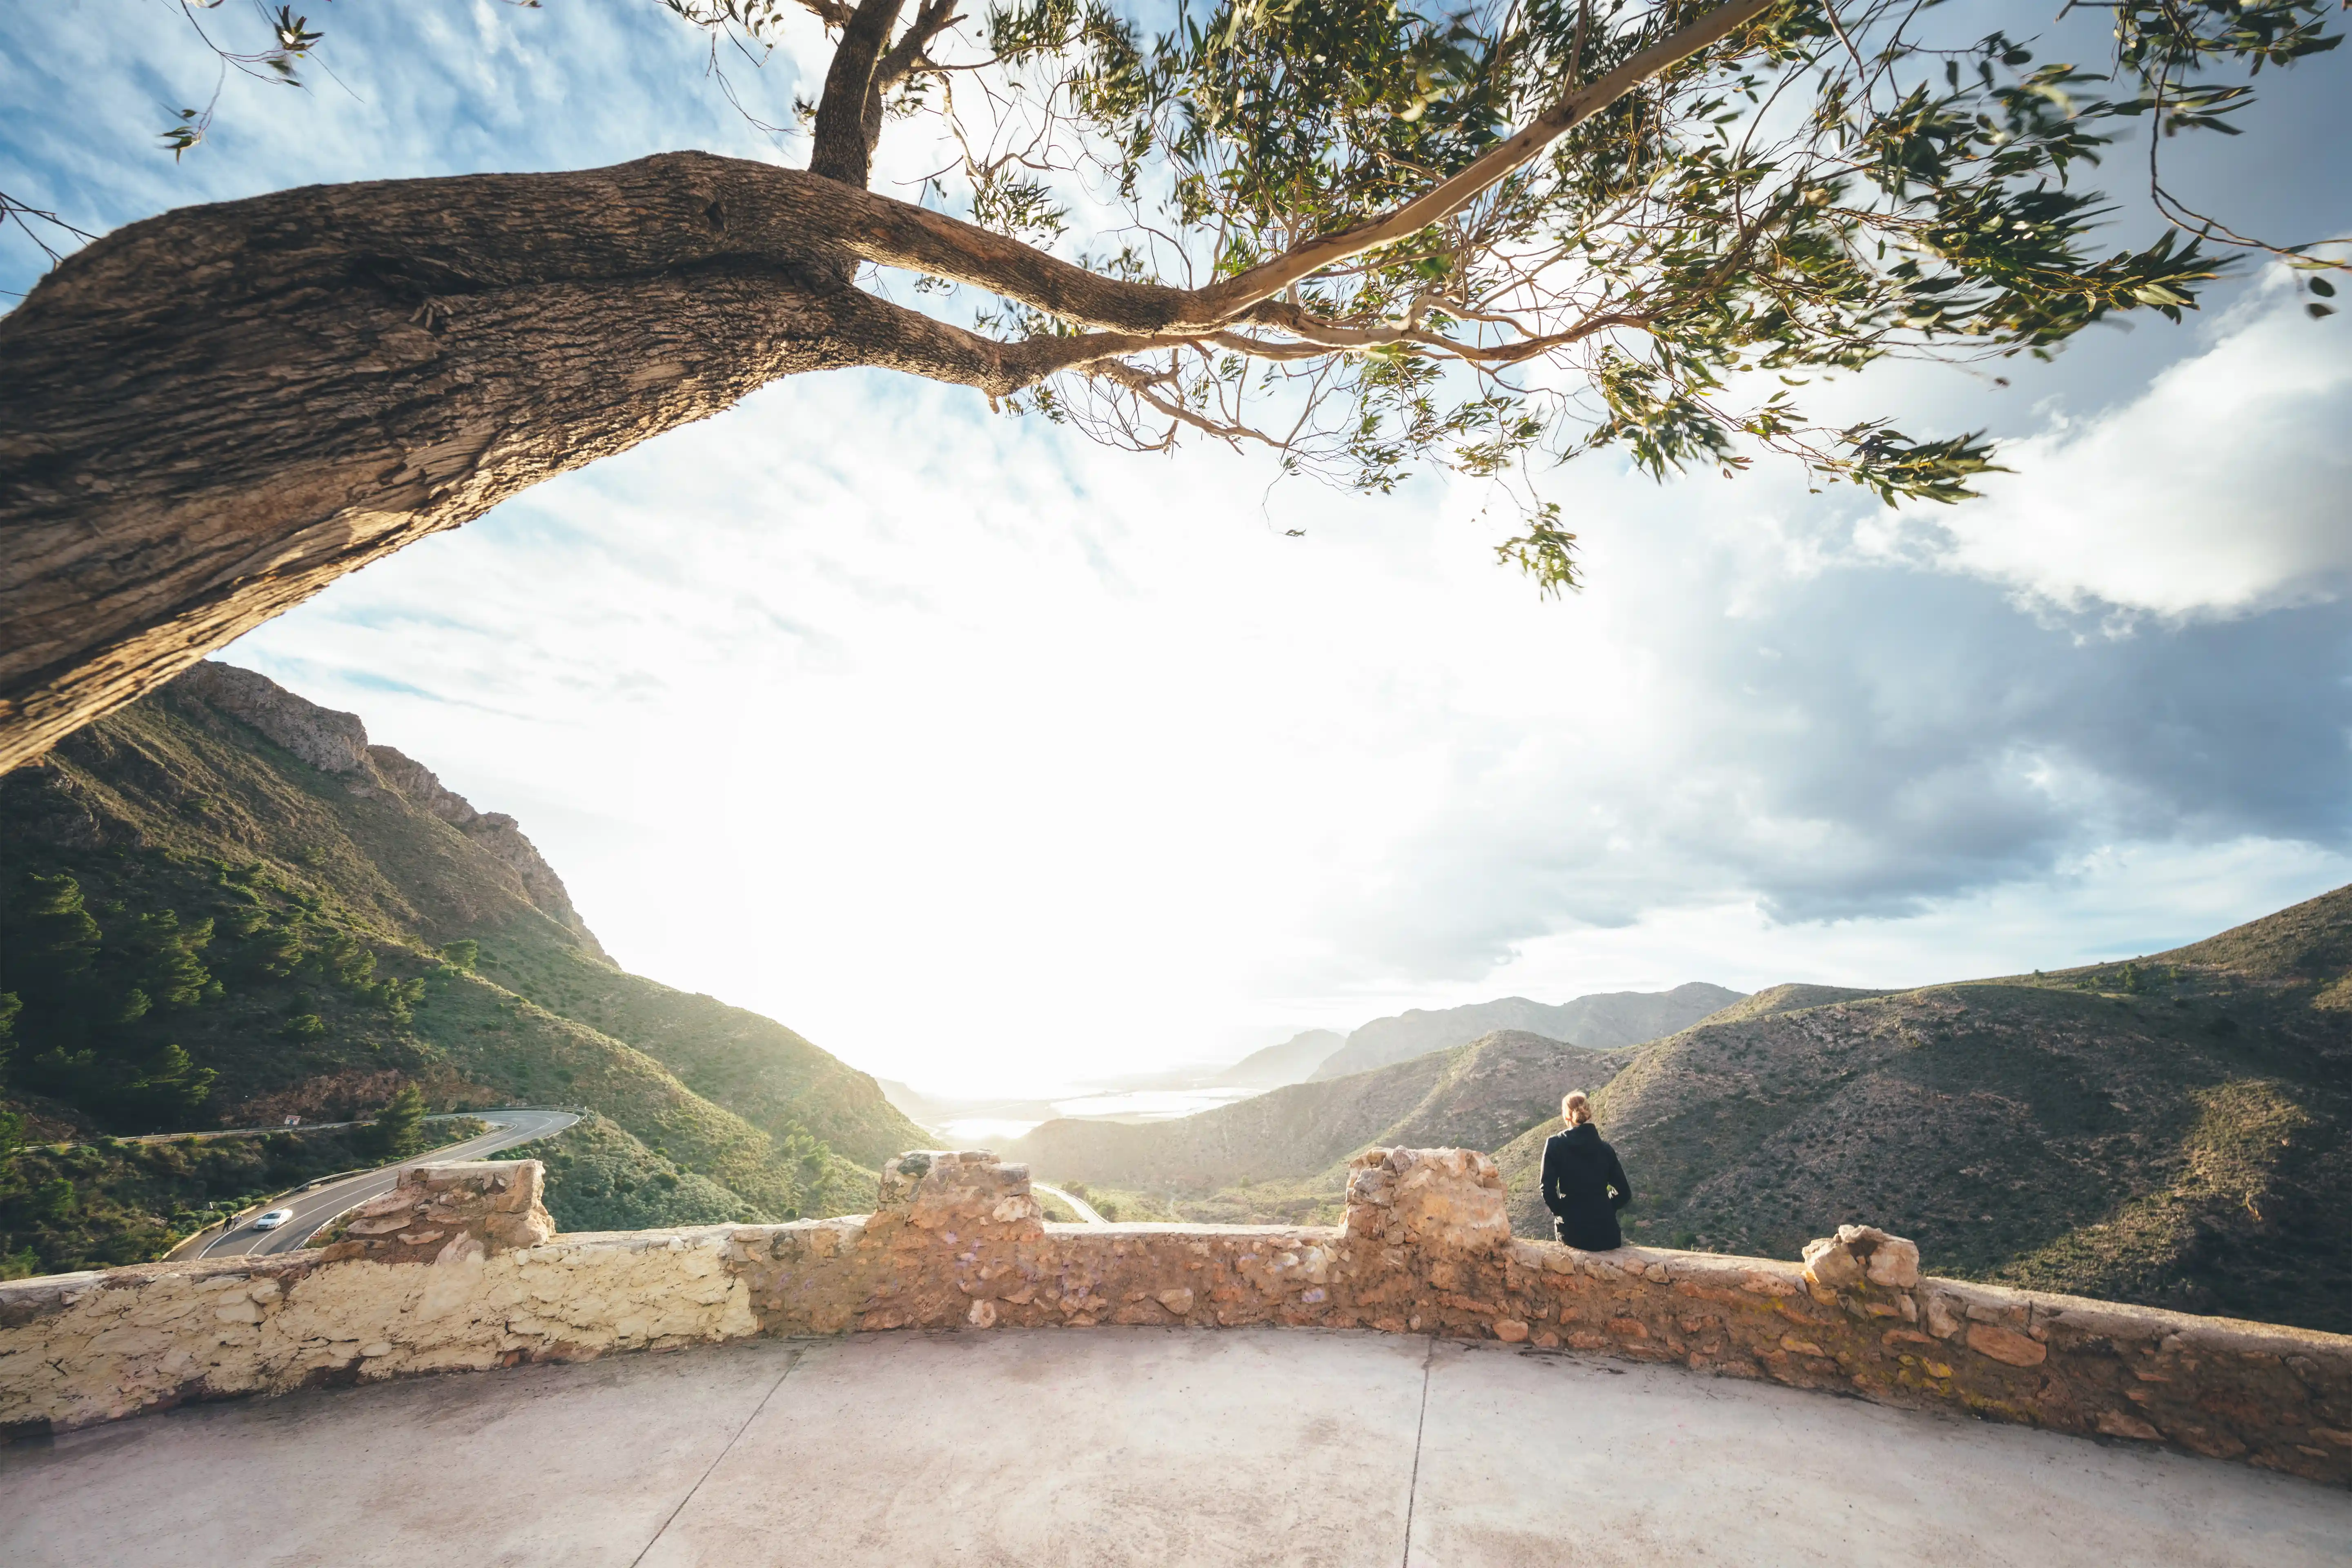 Woman sitting on the wall under the tree looking at mountain landscape in Cartagena, province of Murcia, Spain.
